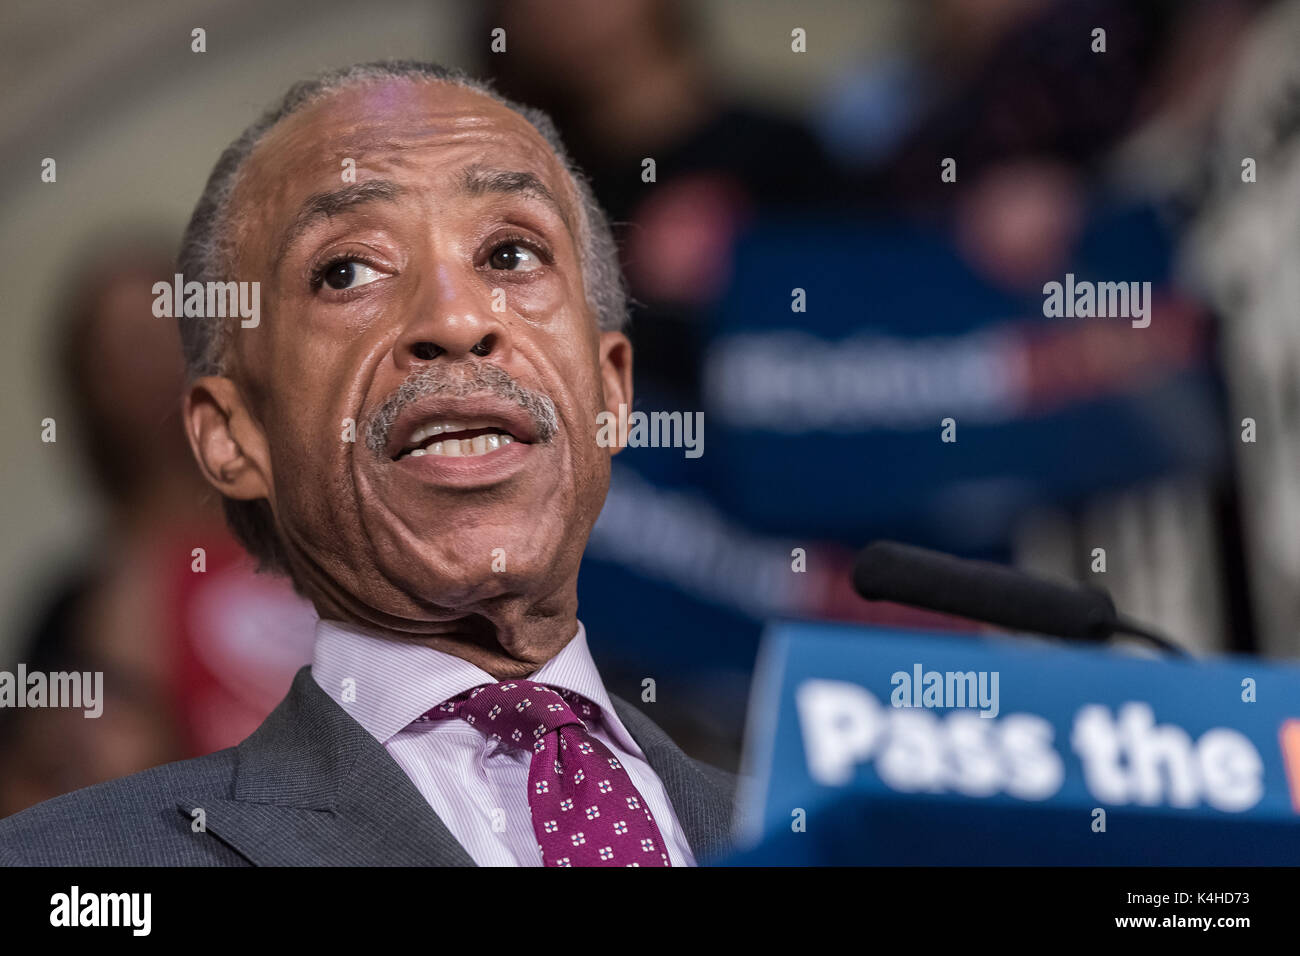 New York, United States. 05th Sep, 2017. Reverend Al Sharpton is seen in City Hall. Following President Donald J. Trump's decision to revoke the Obama-era 'Deferred Action for Childhood Arrivals' (DACA) policy, NYC Mayor, First Lady Chirlaine McCray, key elected City officials and clergy spoke at a rally inside City Hall's rotunda. Credit: PACIFIC PRESS/Alamy Live News Stock Photo